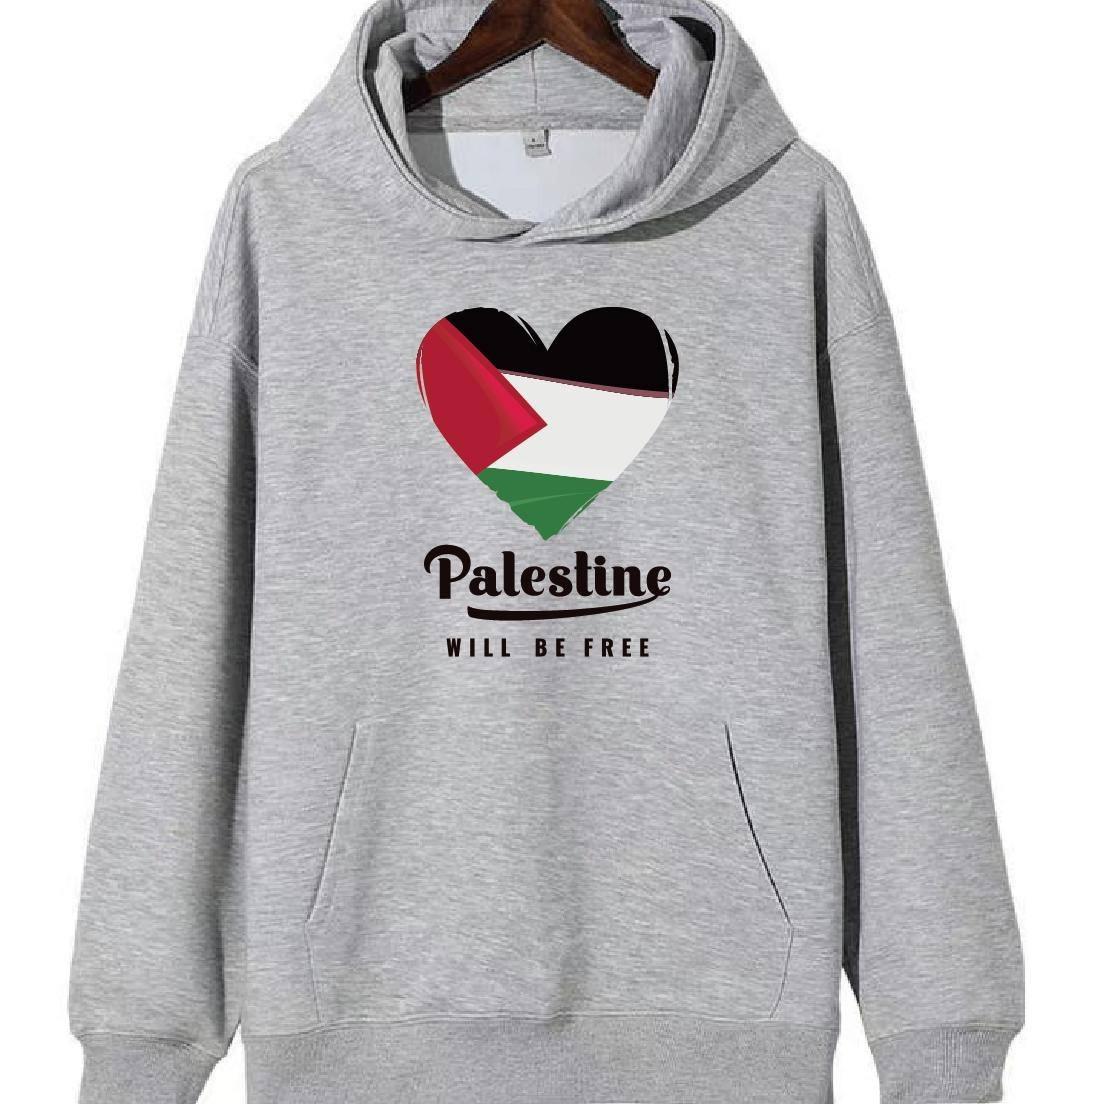 High-Quality "Palestine Will Be Free" Heart Design Hoodie: 100% Cotton